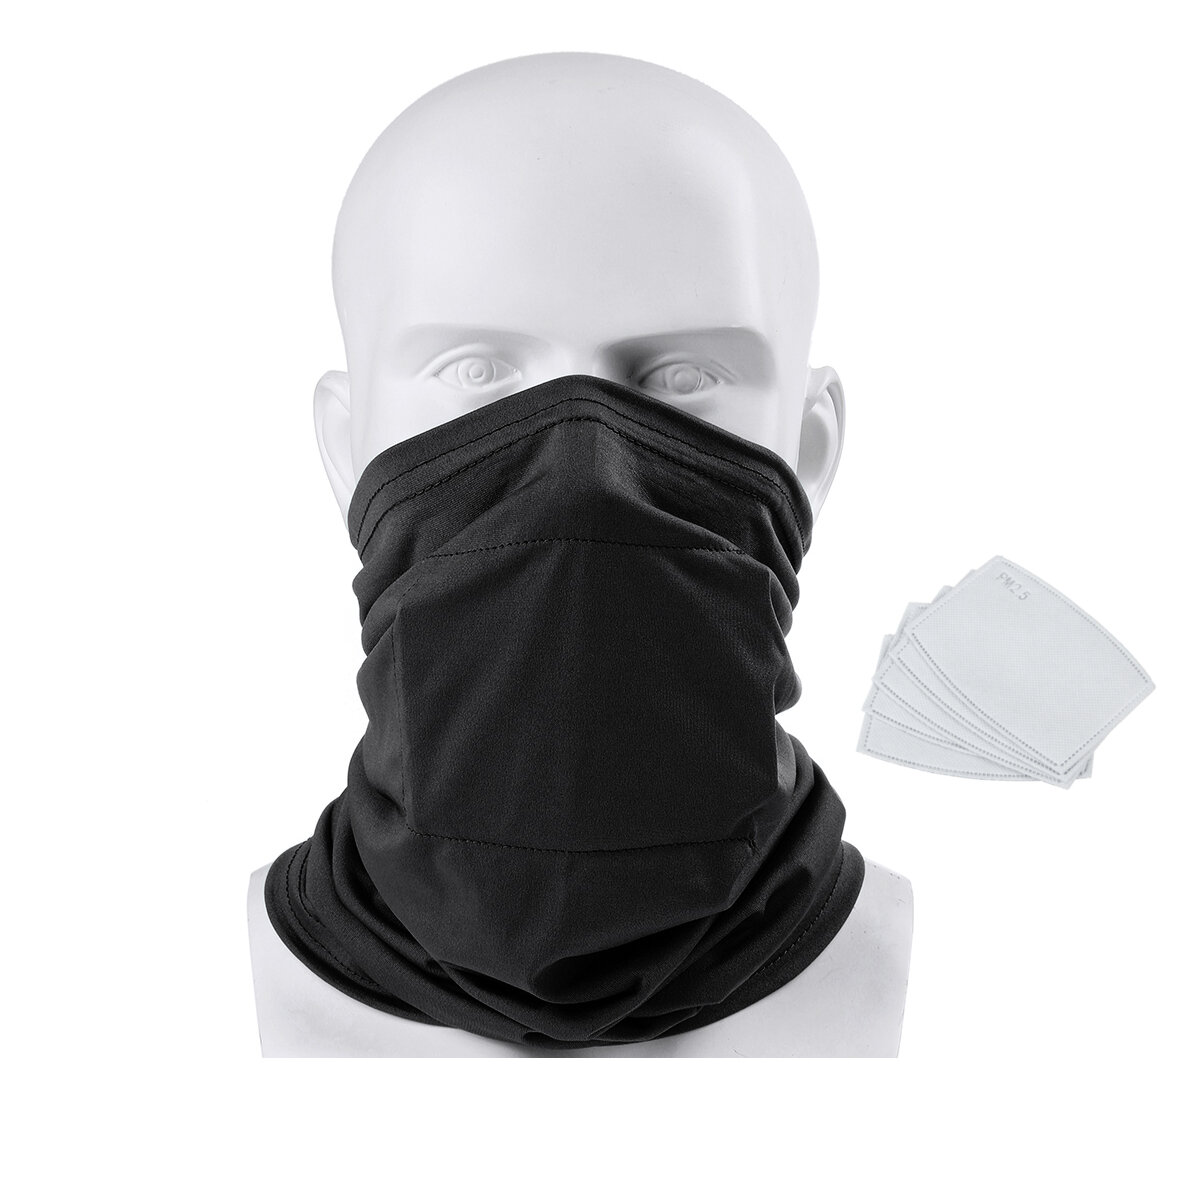 Adult Face Mask With 5pcs PM2.5 Filters Tube Scarf Bandana Head Multi-use Motorcycle Bike Riding Nec